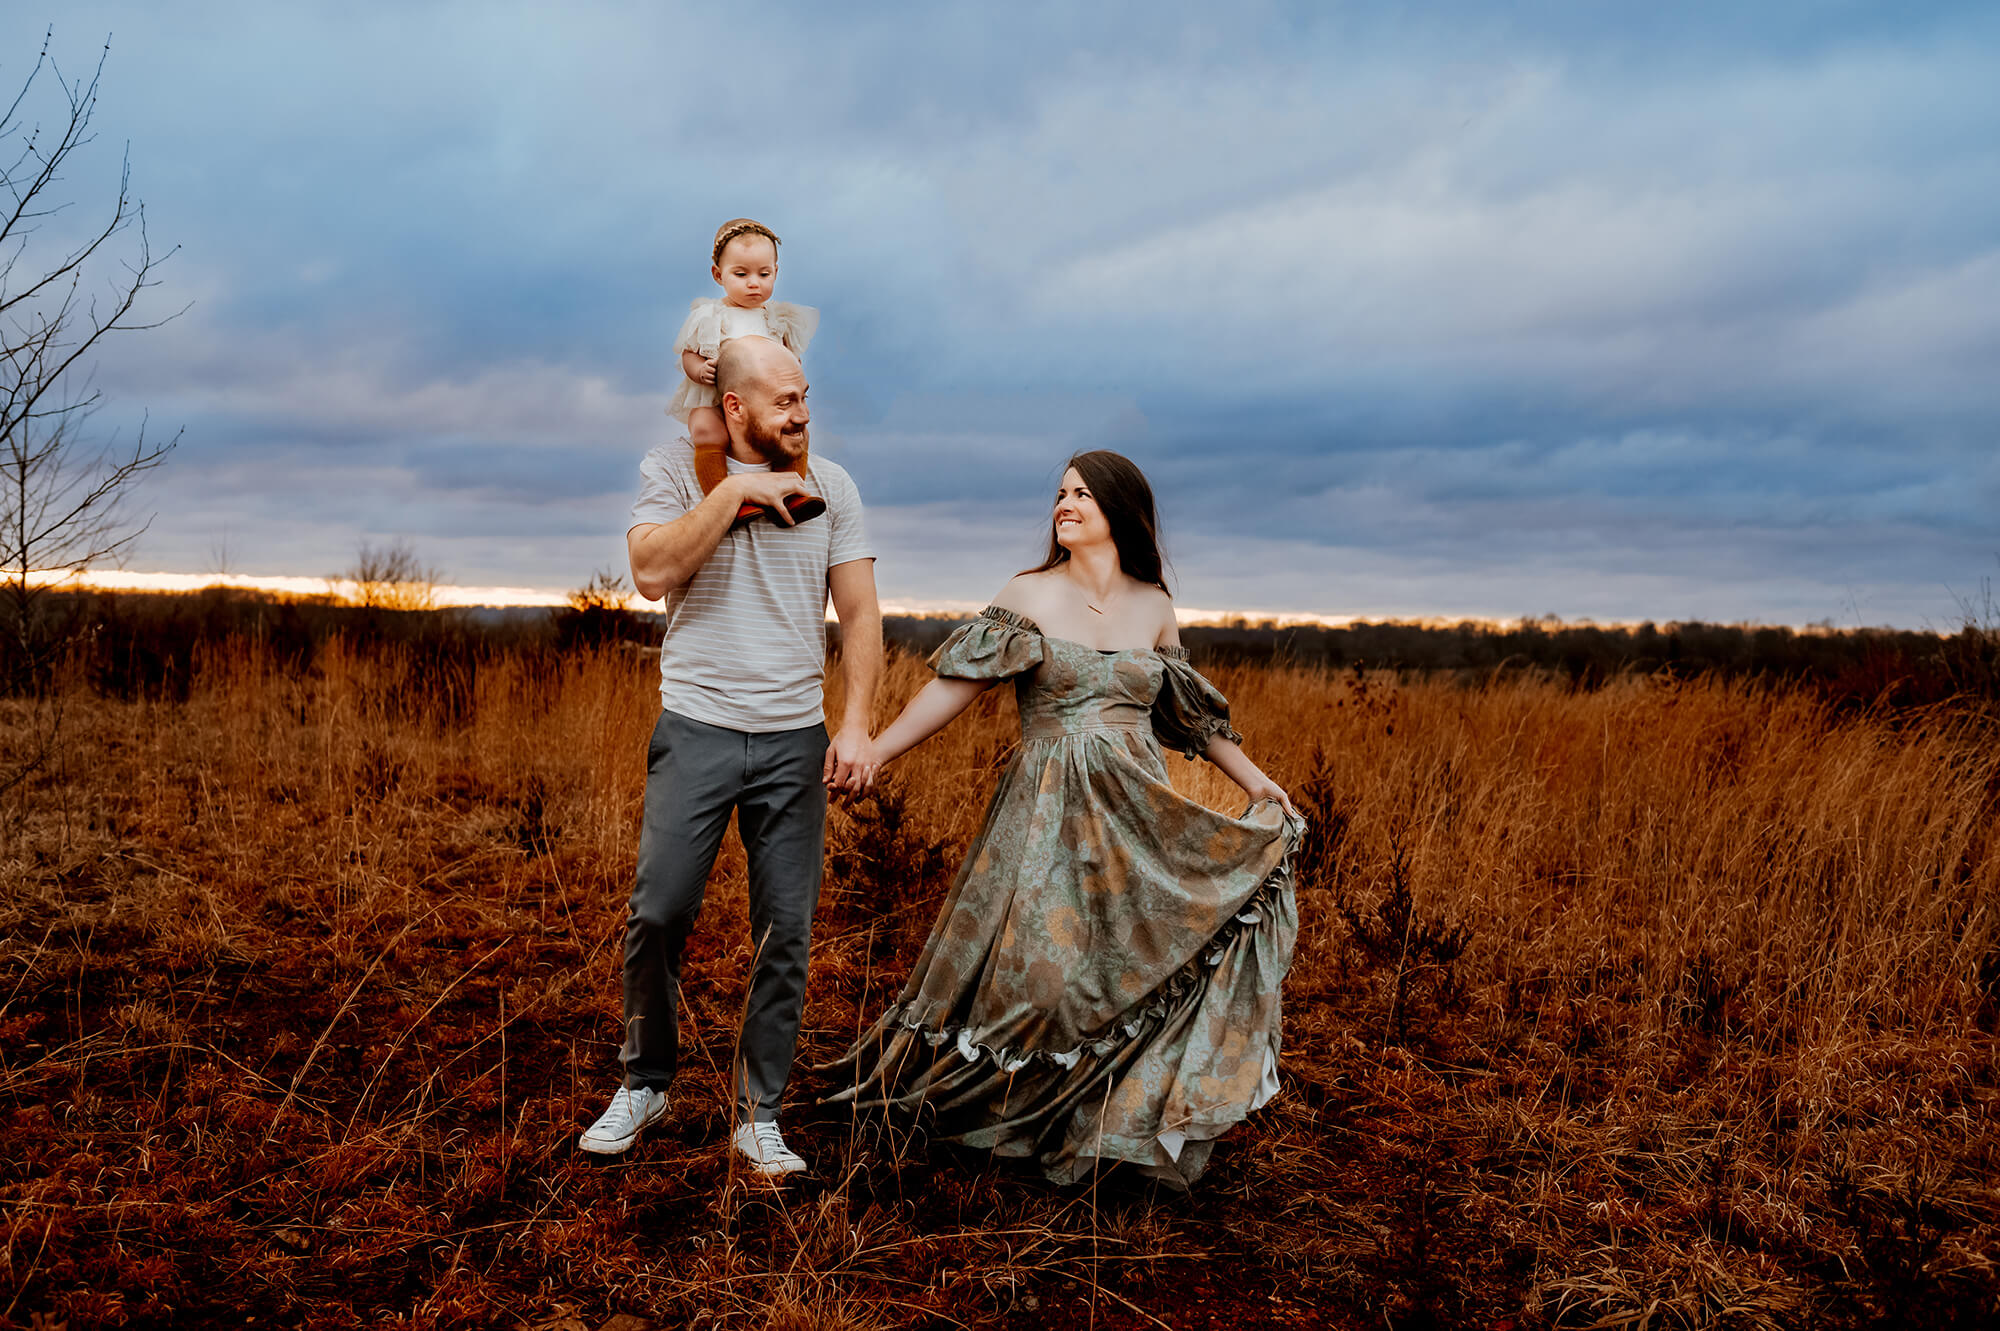 Springfield MO family photographer captures couple walking in field with toddler on dad's shoulder